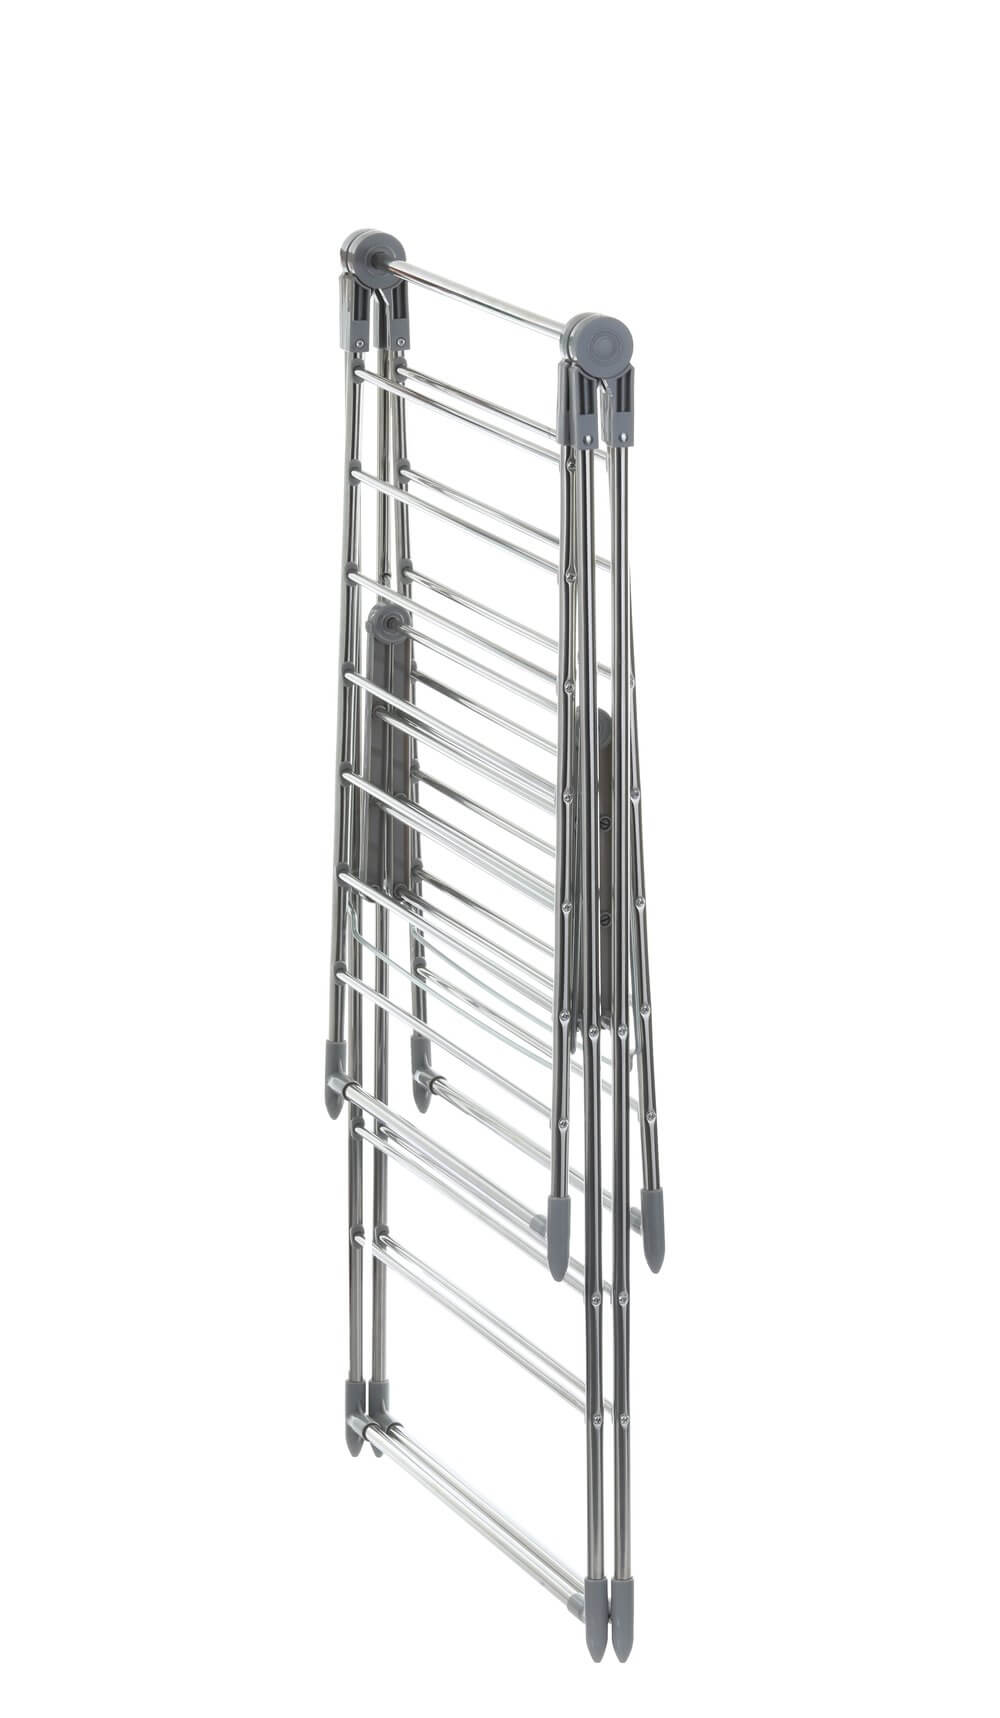 28 Rail Stainless Steel A-Frame Clothes Airer - LAUNDRY - Airers - Soko and Co